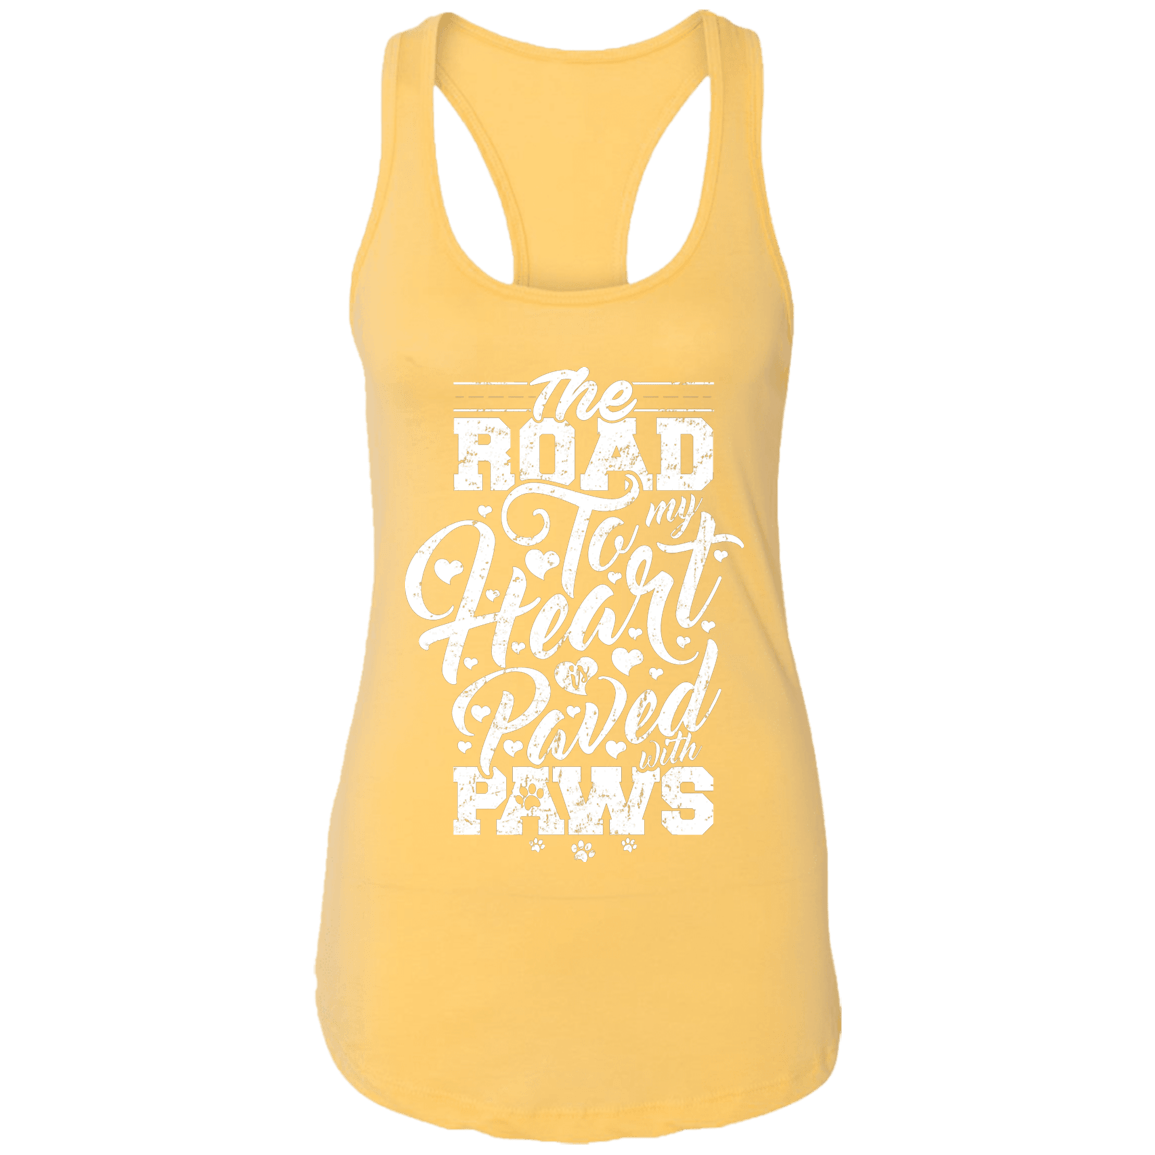 Road To My Heart Paved With Paws - Ladies Racer Back Tank.